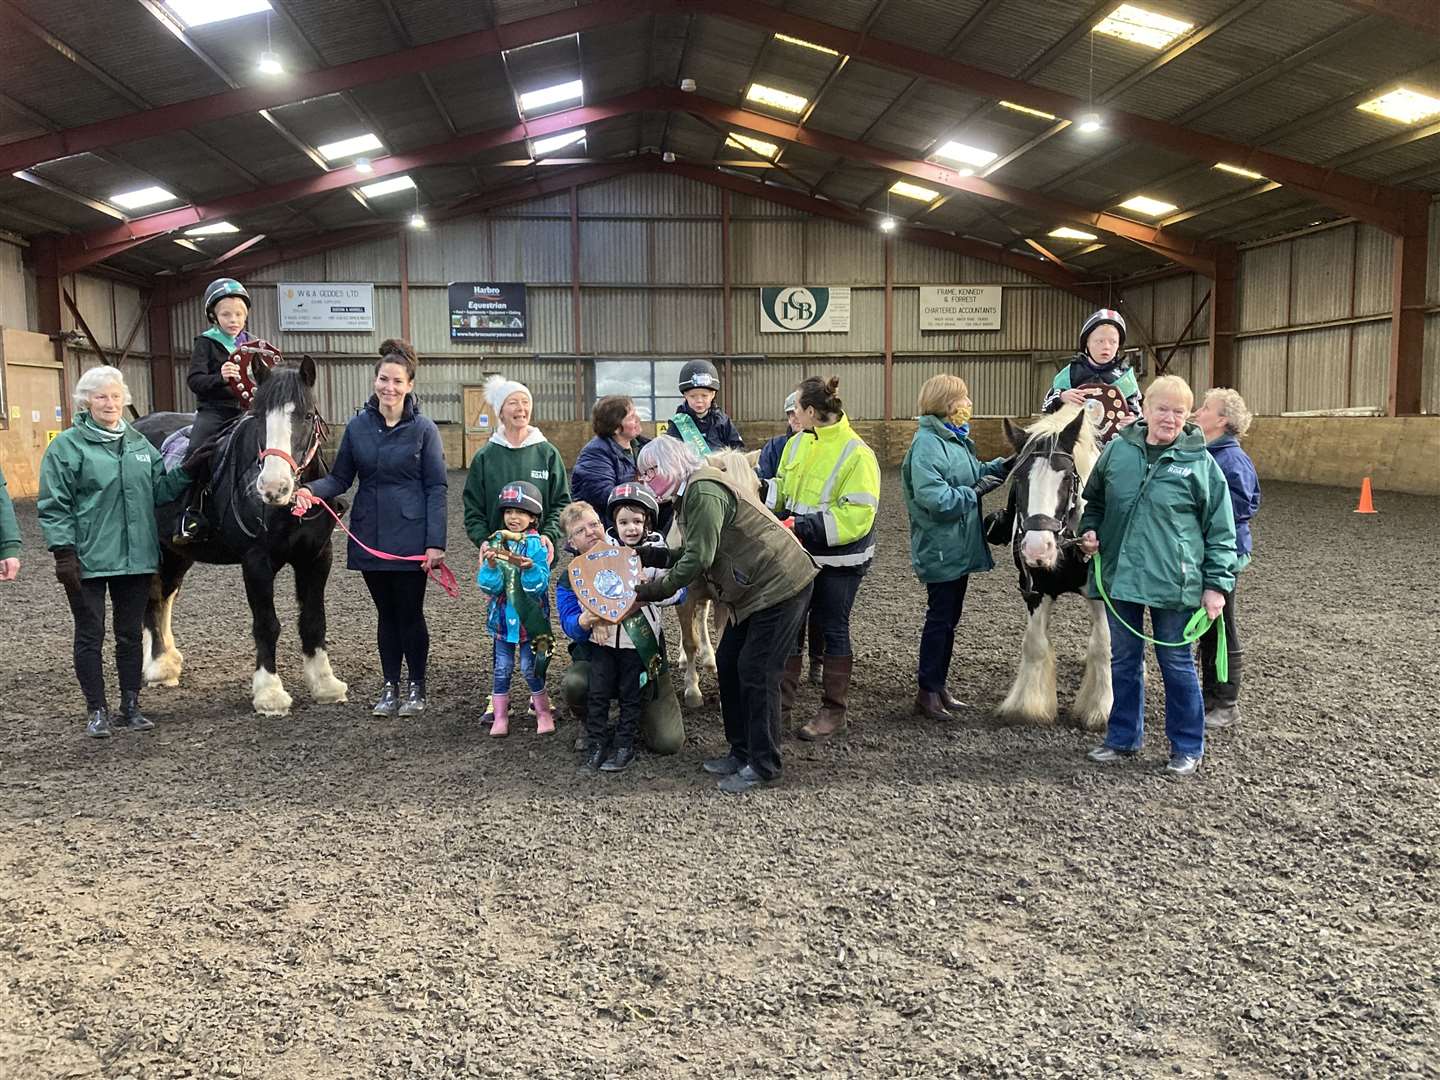 Participants in Ride 1 at the local RDA with their prizes.